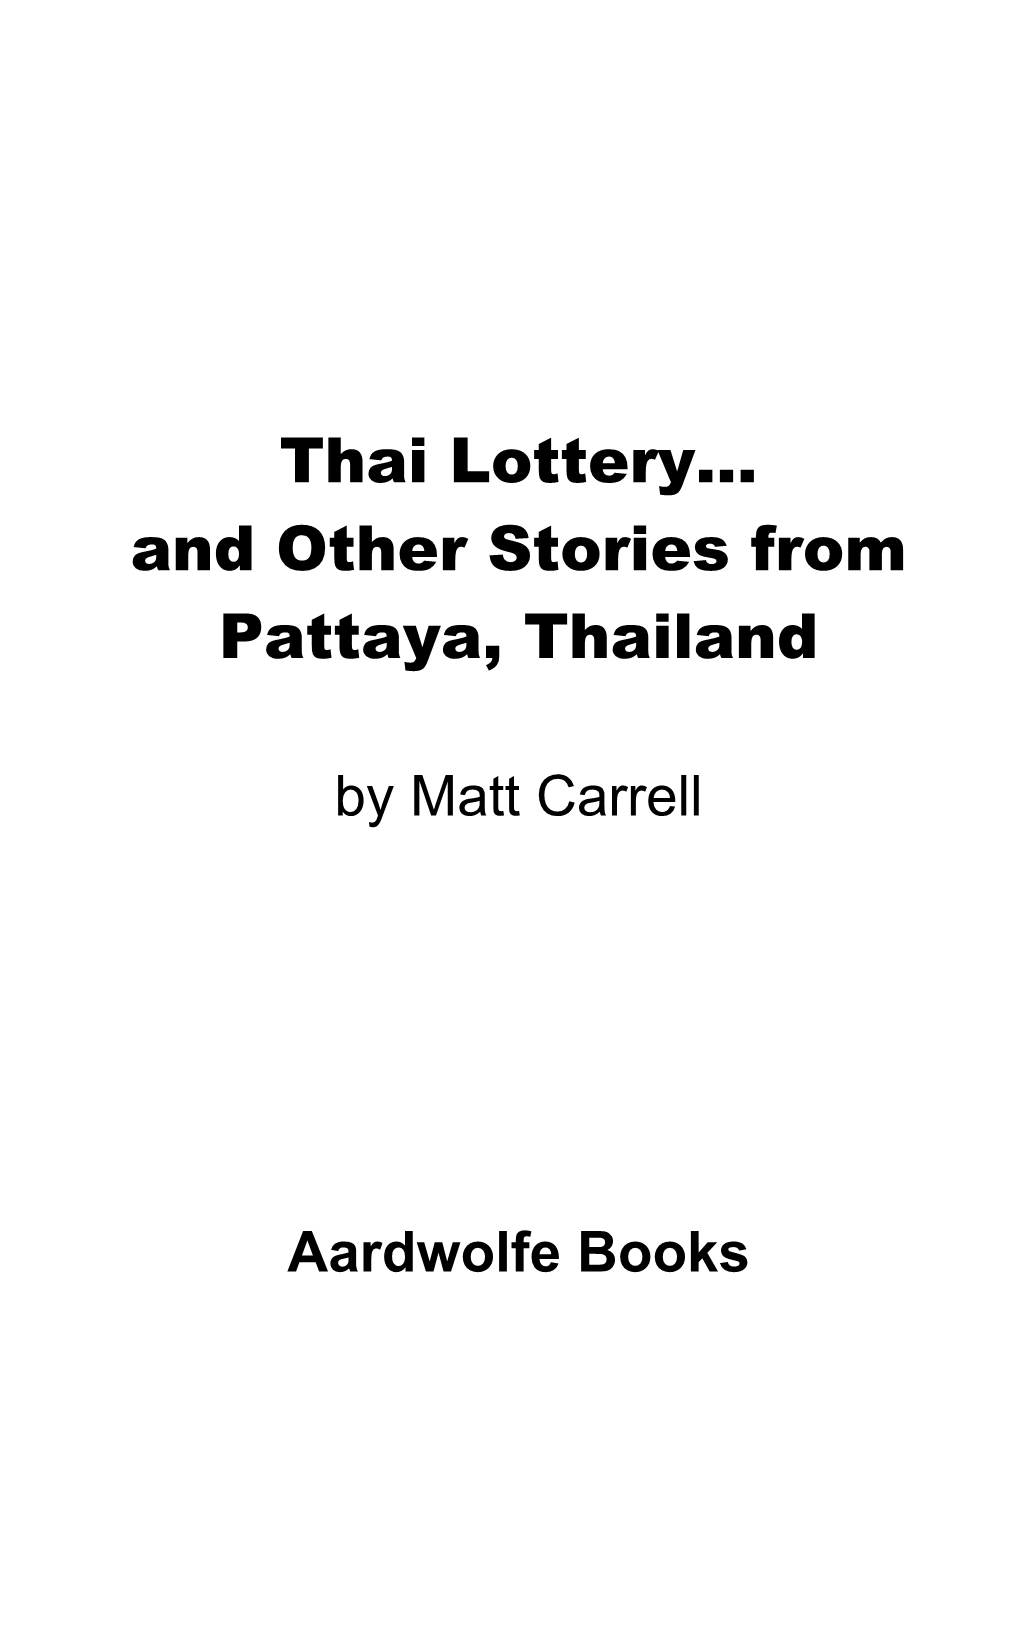 Thai Lottery… and Other Stories from Pattaya, Thailand